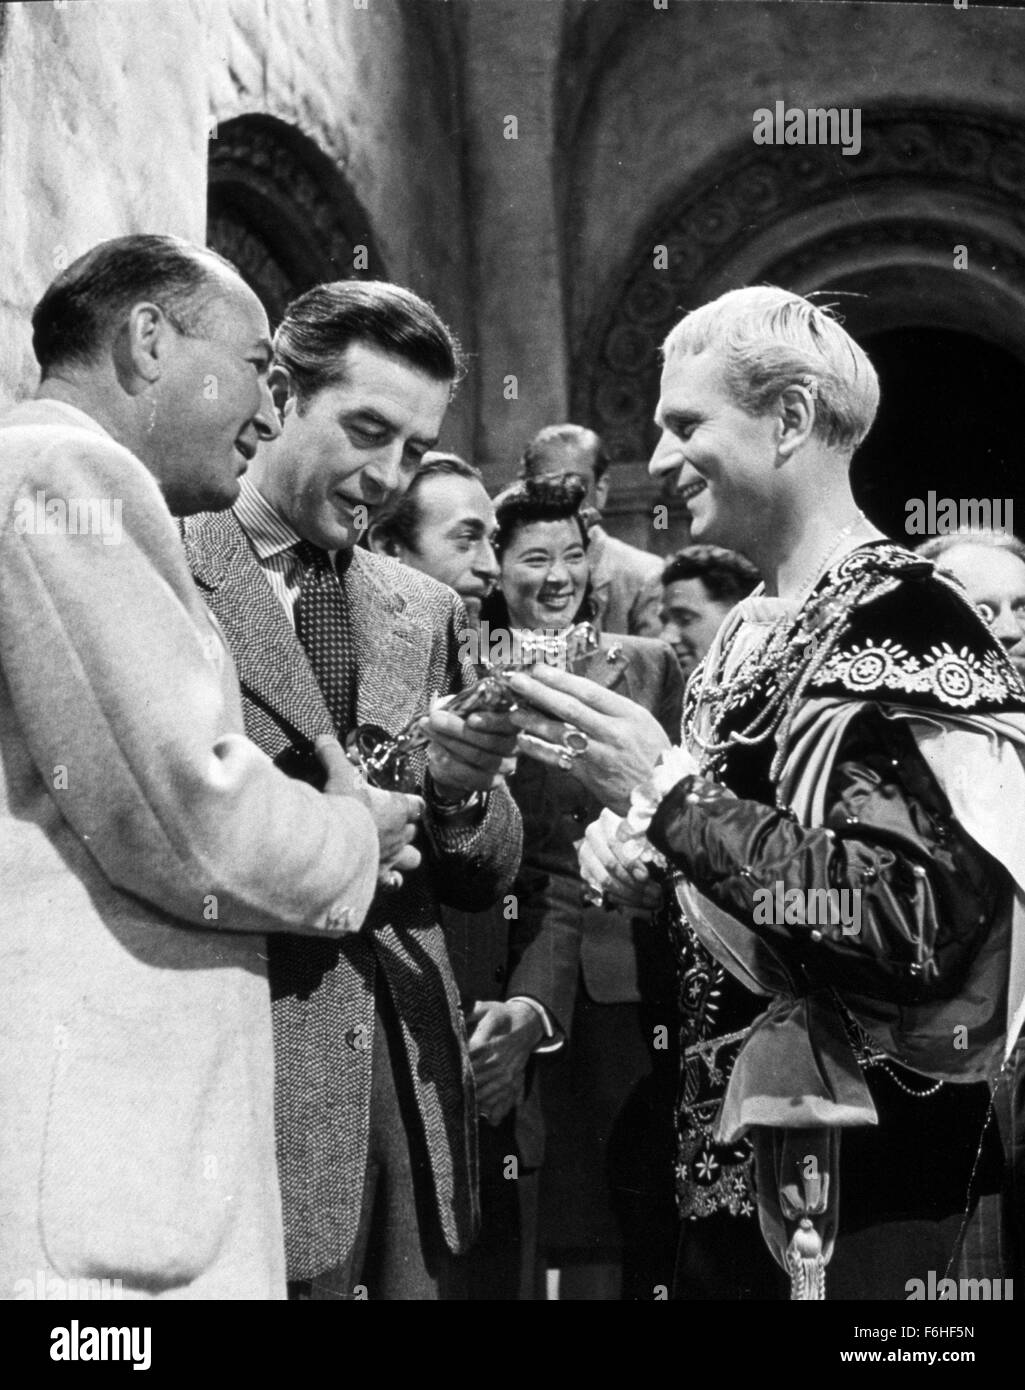 1944, Film Title: HENRY V, Director: LAURENCE OLIVIER, Pictured: ACCESSORIES, ENGLAND LONDON, RAY MILLAND, LAURENCE OLIVIER, OSCAR (ACADEMY AWARD STATUE), HAL B WALLIS, OSCAR RETRO, OSCAR (PERSONALITY). (Credit Image: SNAP) Stock Photo